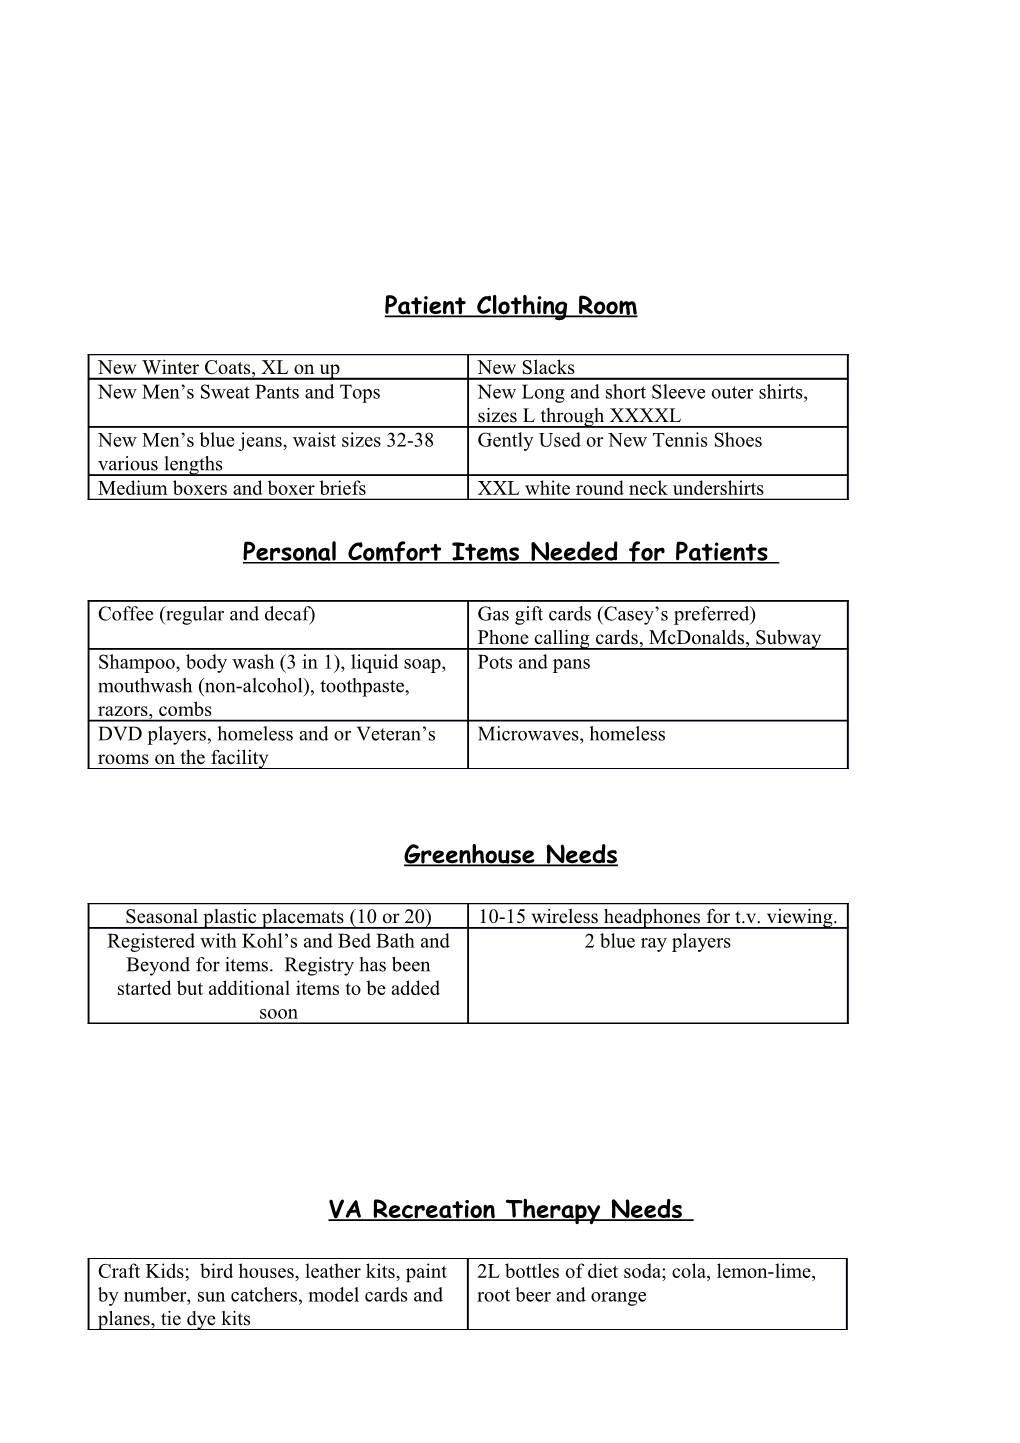 Personal Comfort Items Needed for Patients